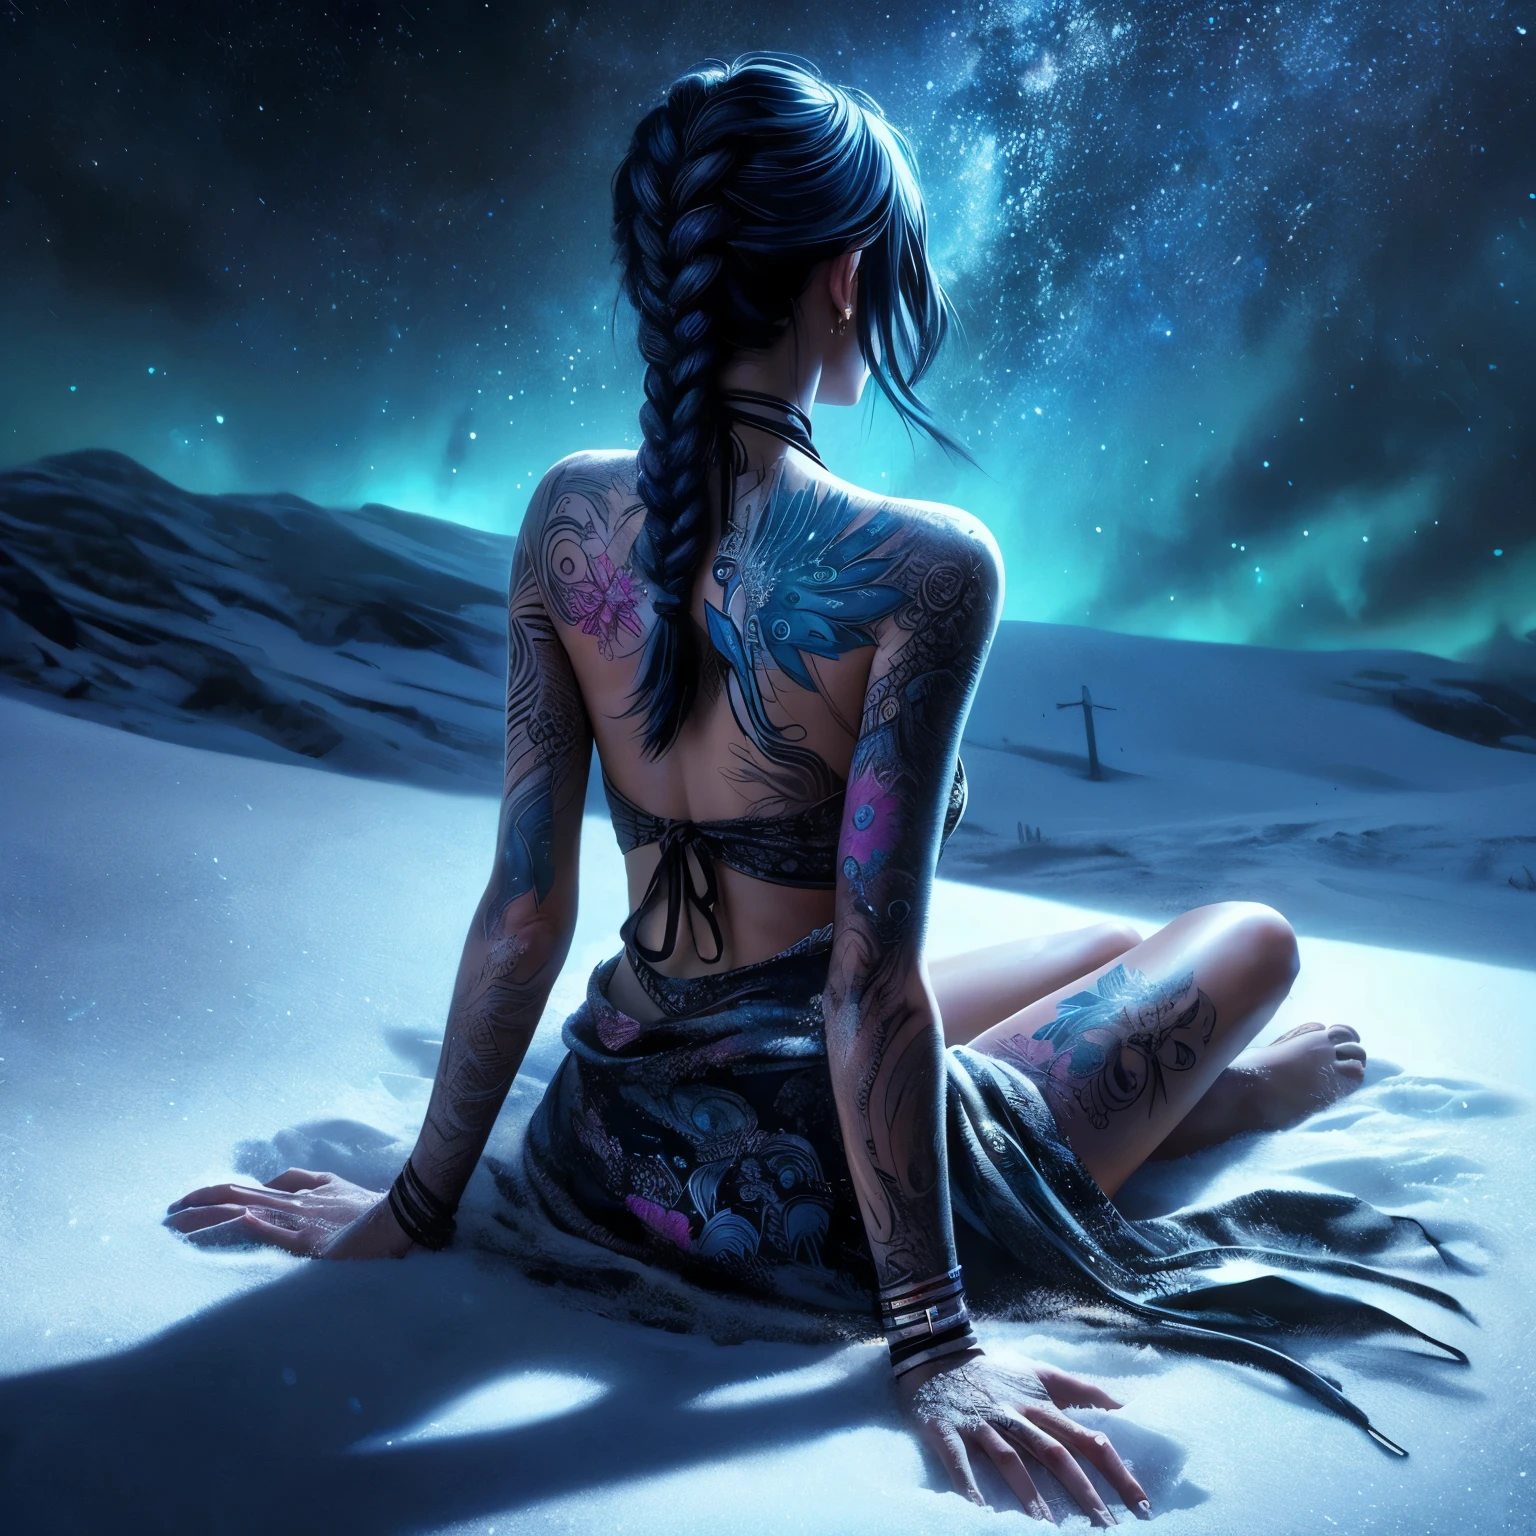 cute back tattooed woman sitting in the snow on a star filled night, blue-green night sky lighting, its dark and shadowy, she feels like she is freezing but does not care, she feels the cold snow sitting legs under her arms crossed, wearing a print top with peacock graphics colors, and a braided knot silk beach skirt, turned away from camera to the left, night sky, sitting in 8 inches of fresh snow, short blue-black hair, closeup cowboy shot, oil painting on slate, sci-fi art style, 36k resolution,
